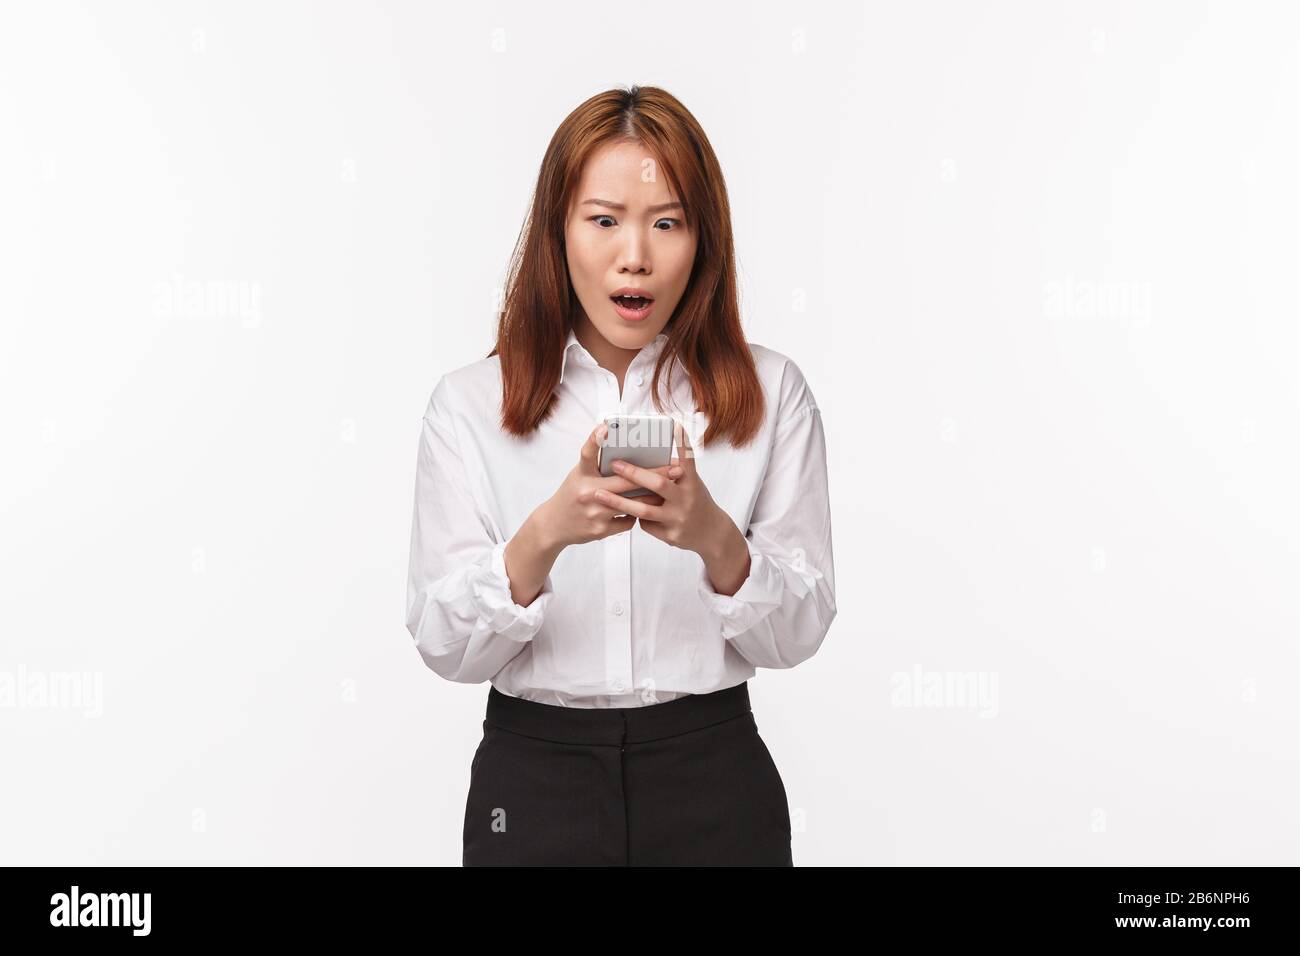 Portrait Of Shocked And Speechless Asian Woman Staring At Smartphone